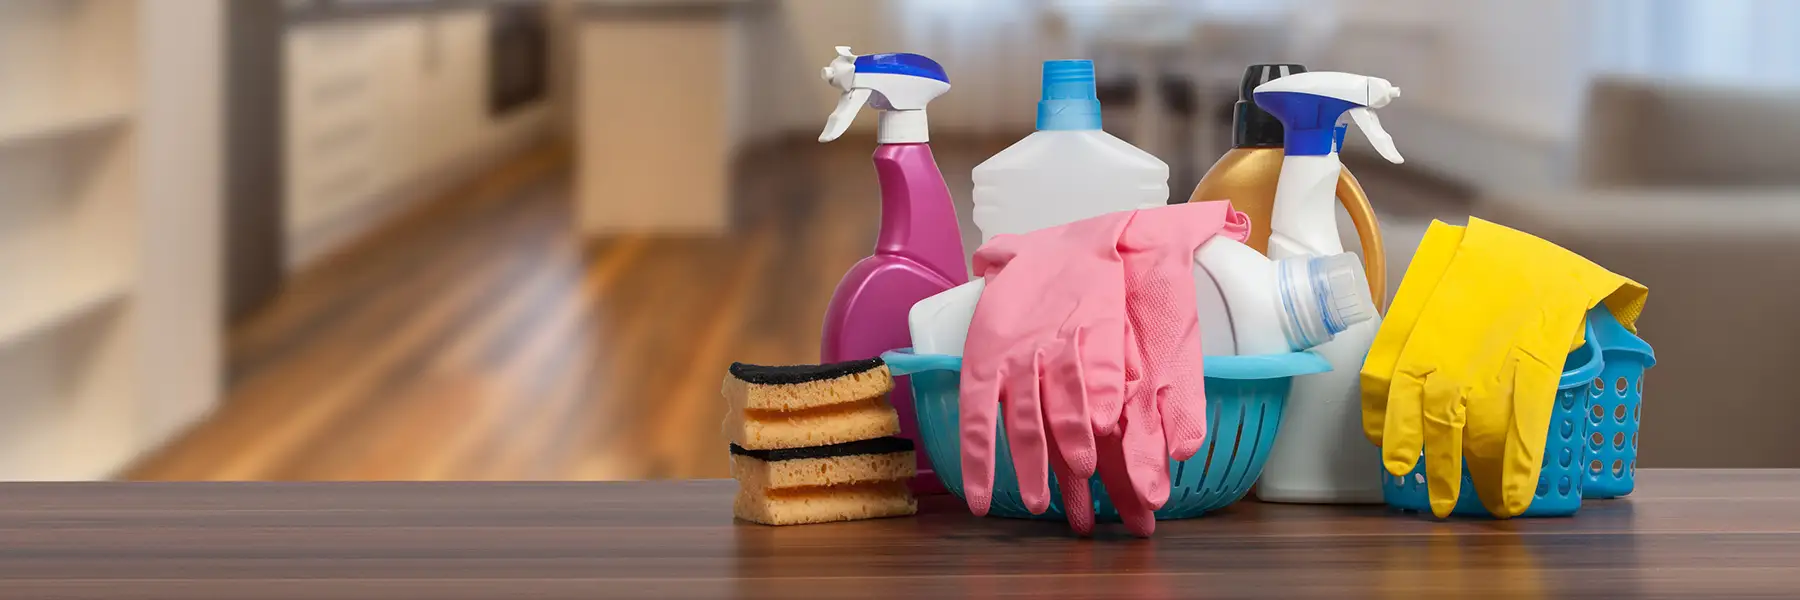 Clean house with cleaning products